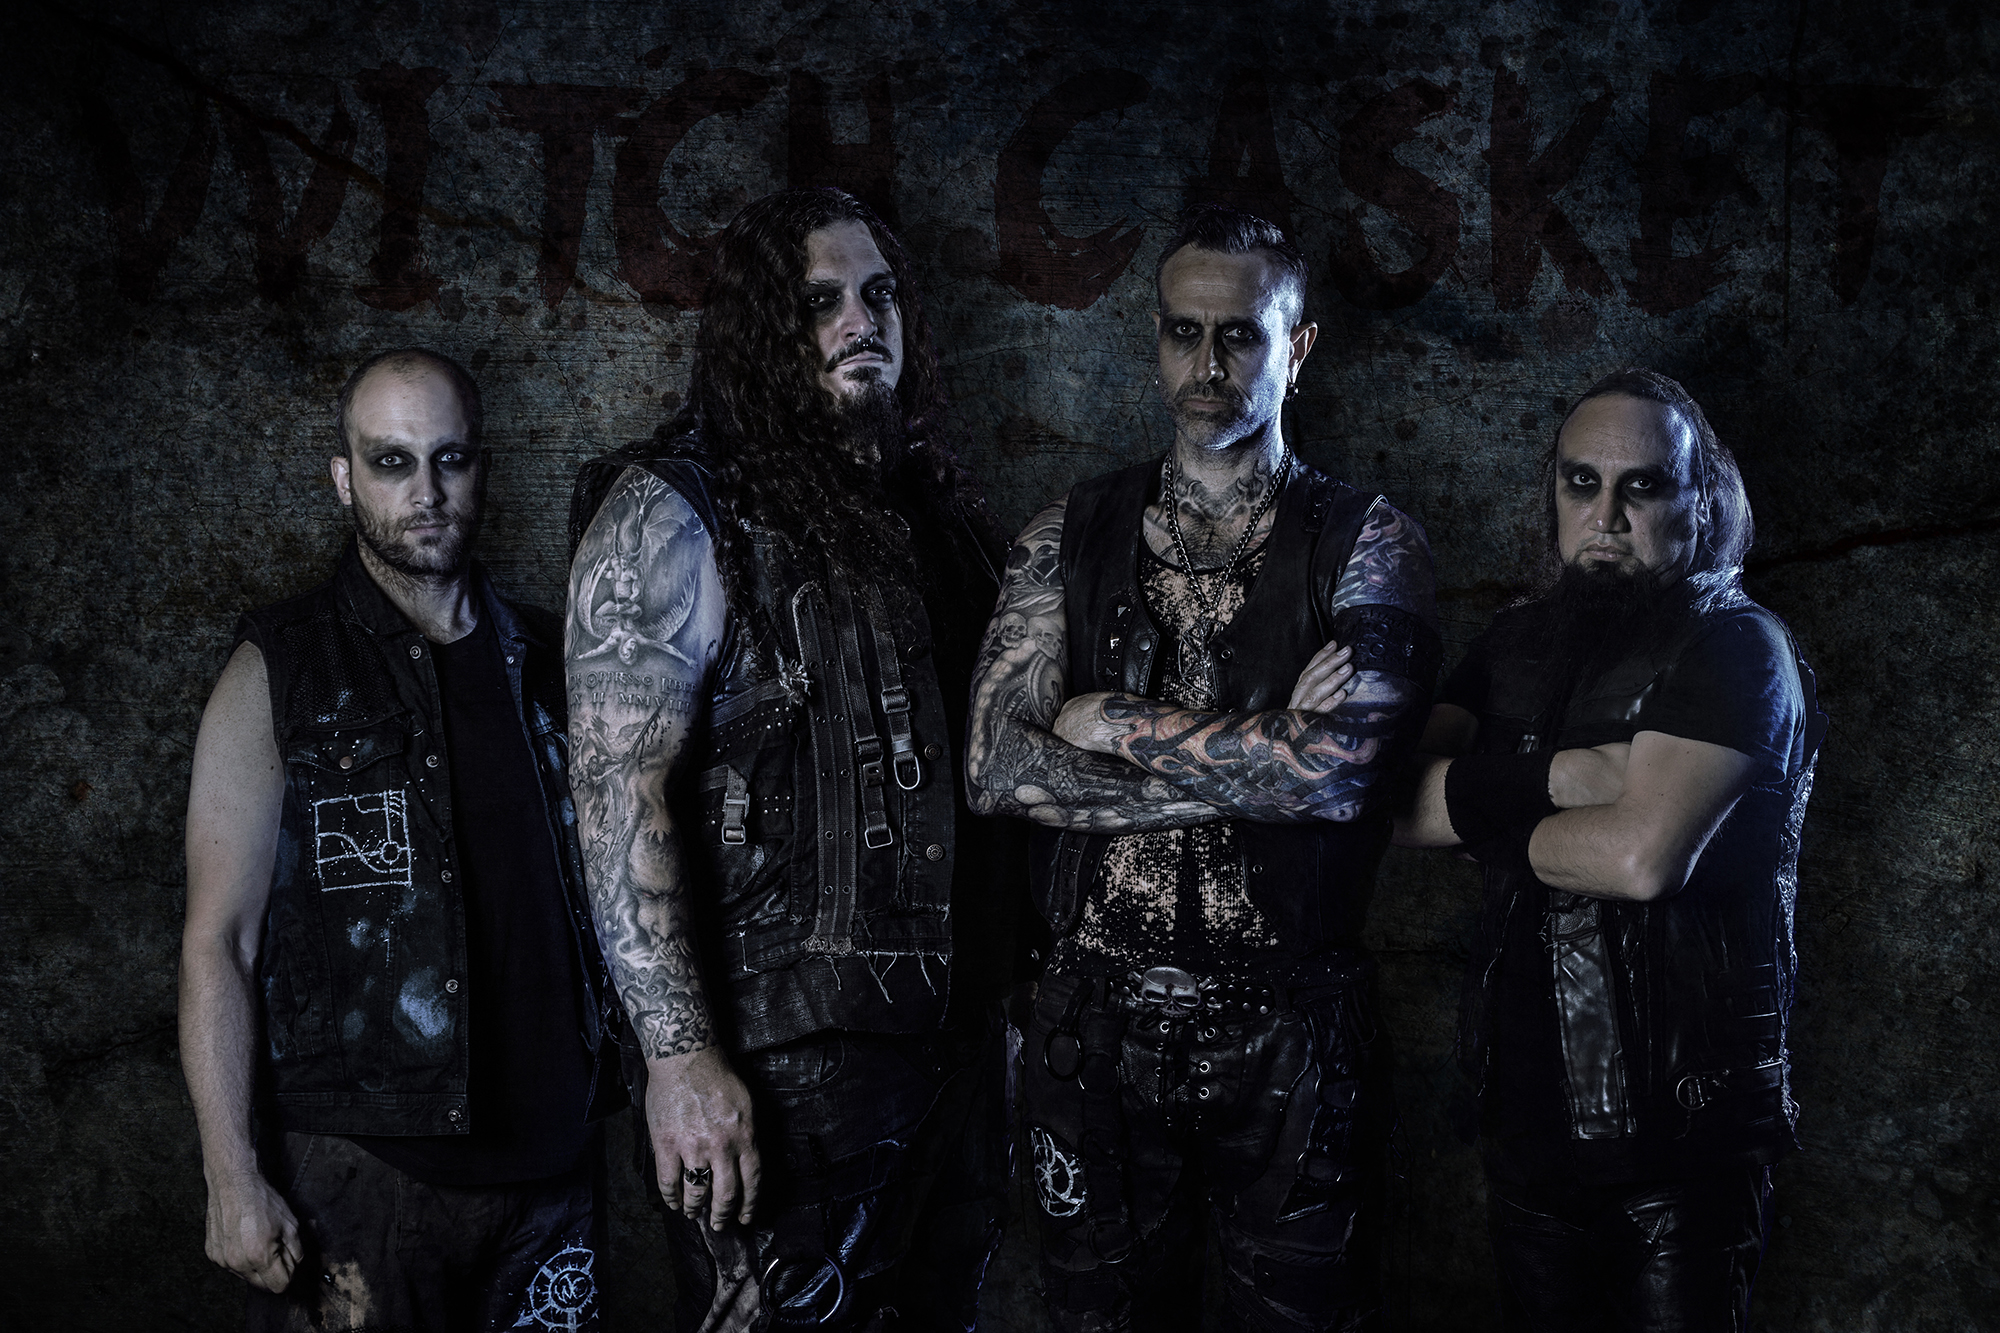 Interview: Witch Casket’s Drogoth on losing Neal Tiemann to DevilDriver, ‘Punishment’ EP